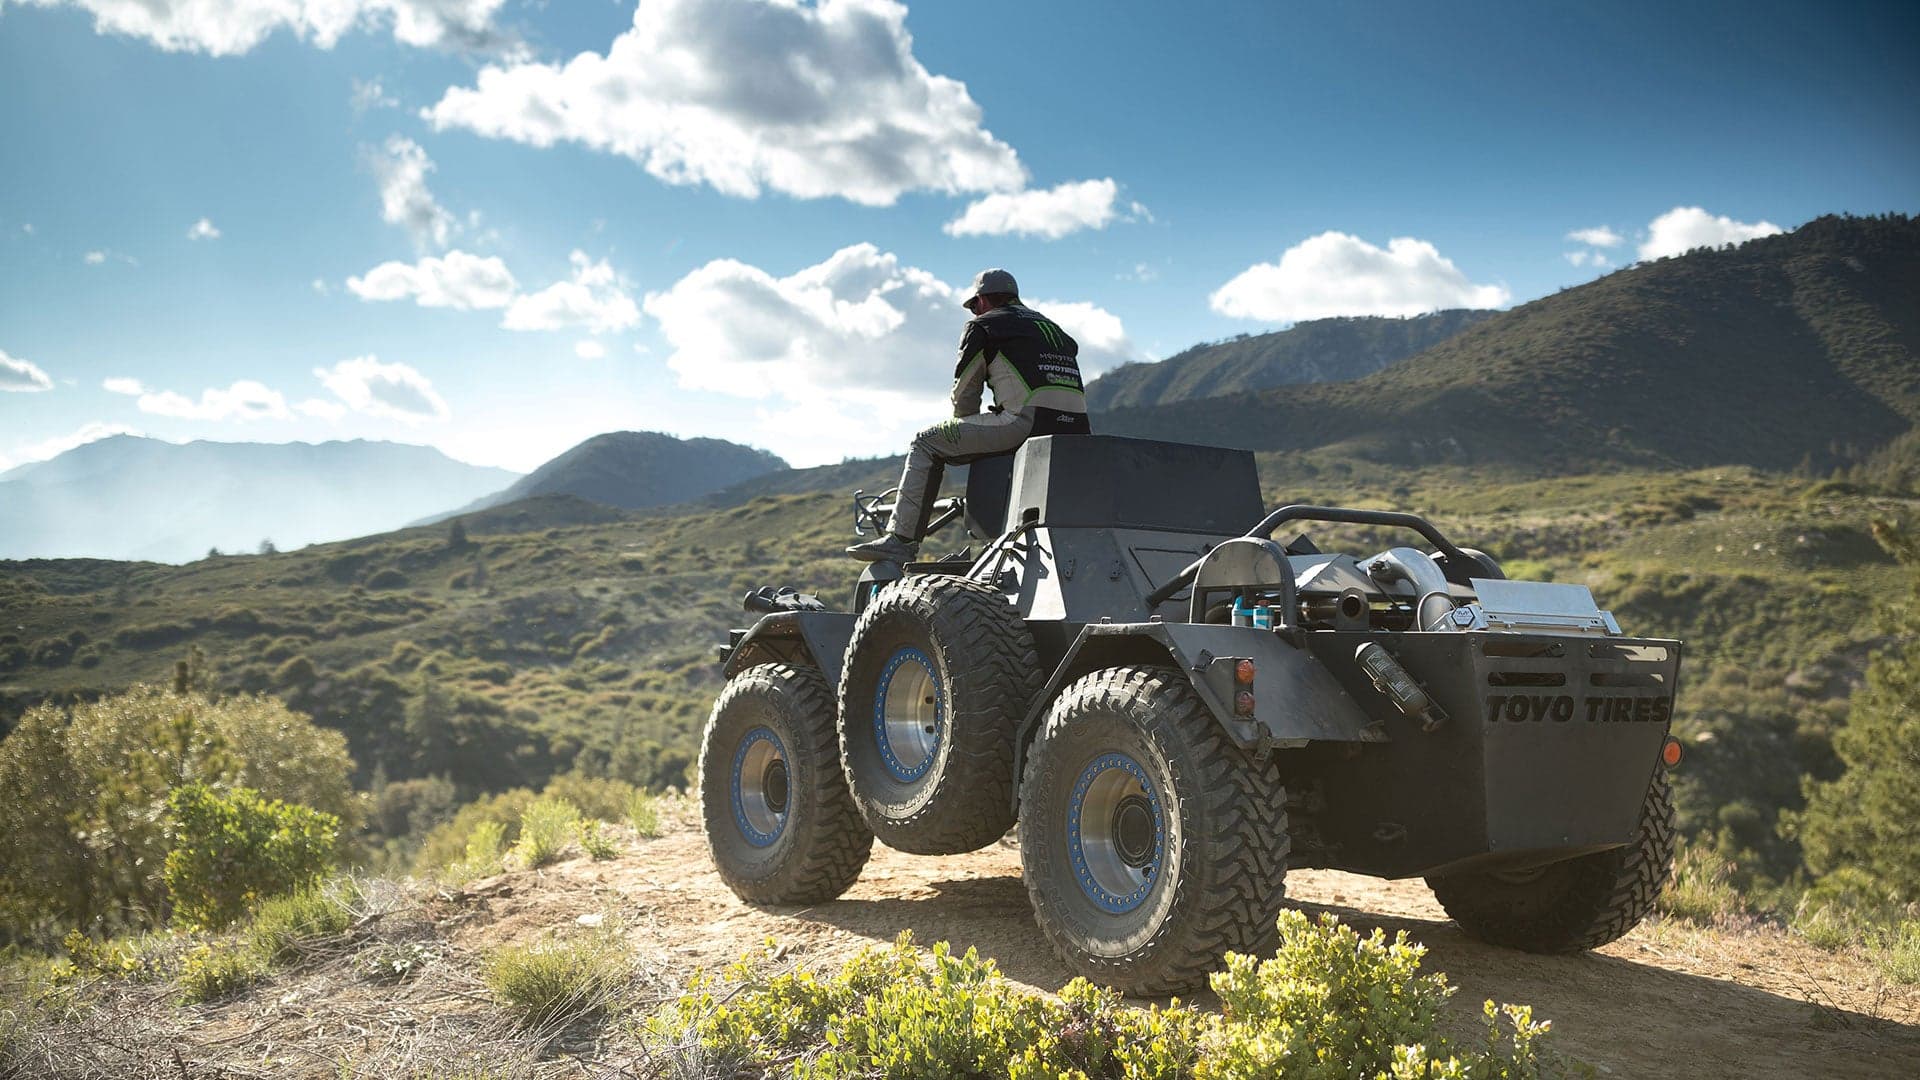 Toyo’s Amazing Six-Wheeled, V8 Recon Tank Makes Tires Cool